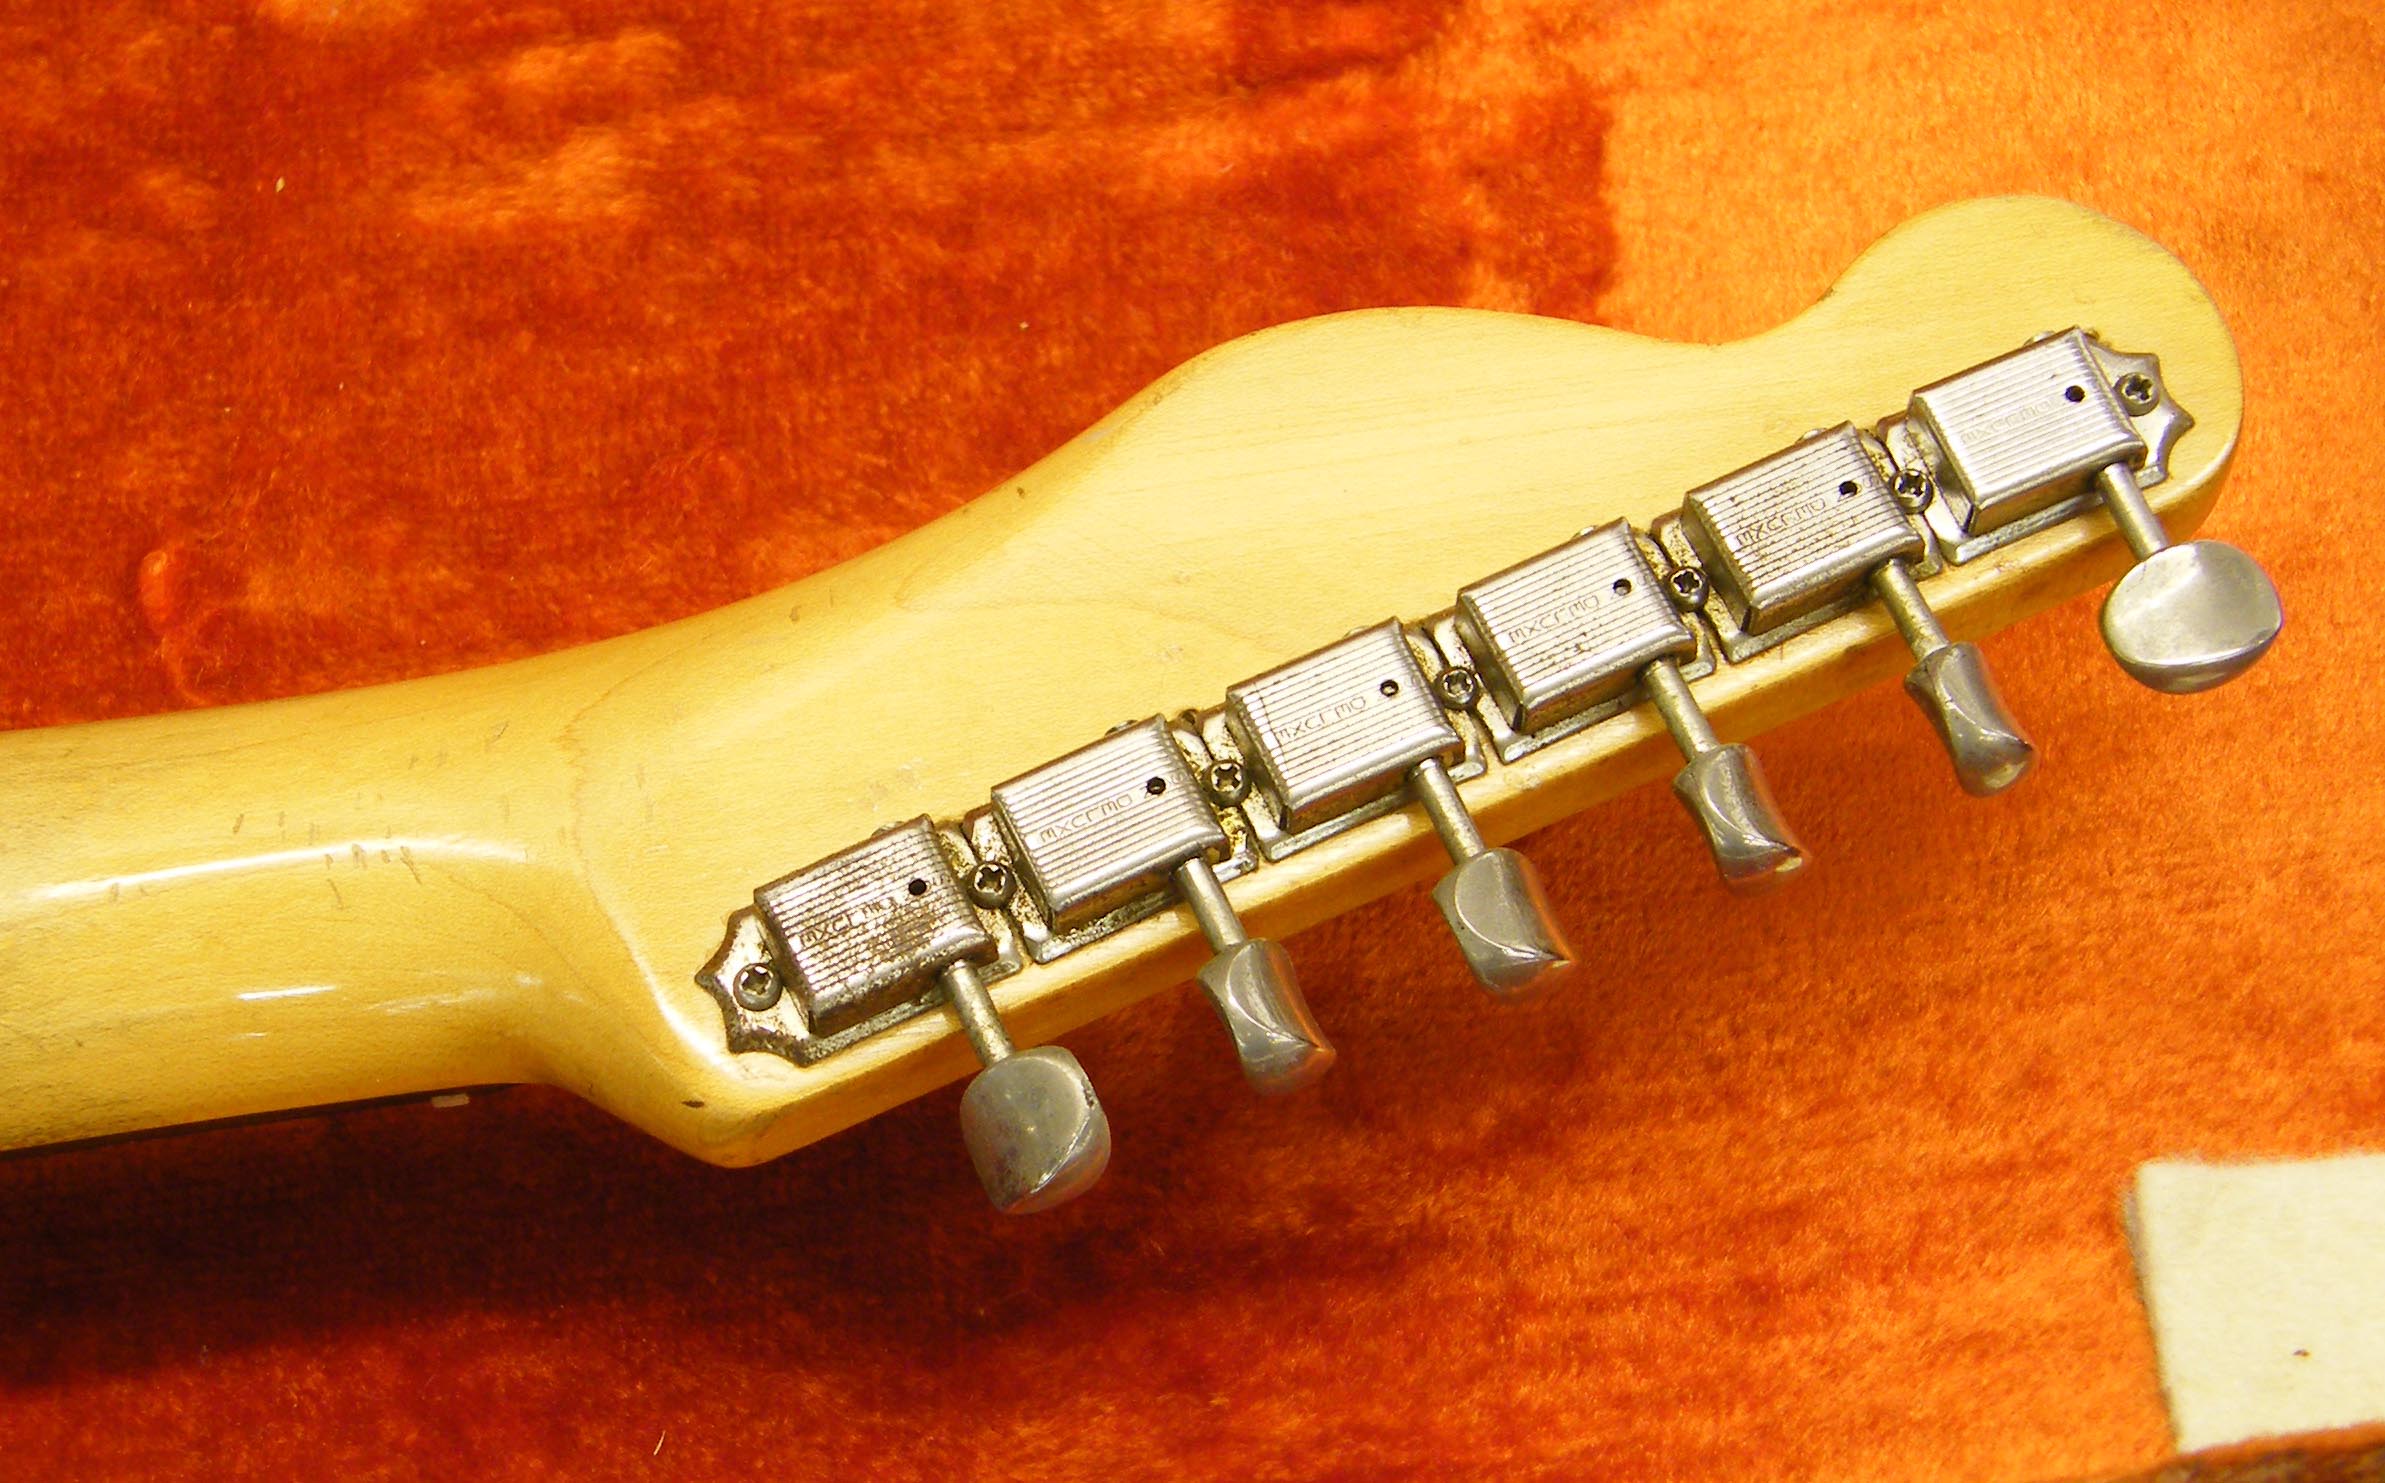 1960 Fender Custom Esquire electric guitar, made in USA, ser. no. 54146, sunburst finish with - Image 6 of 8